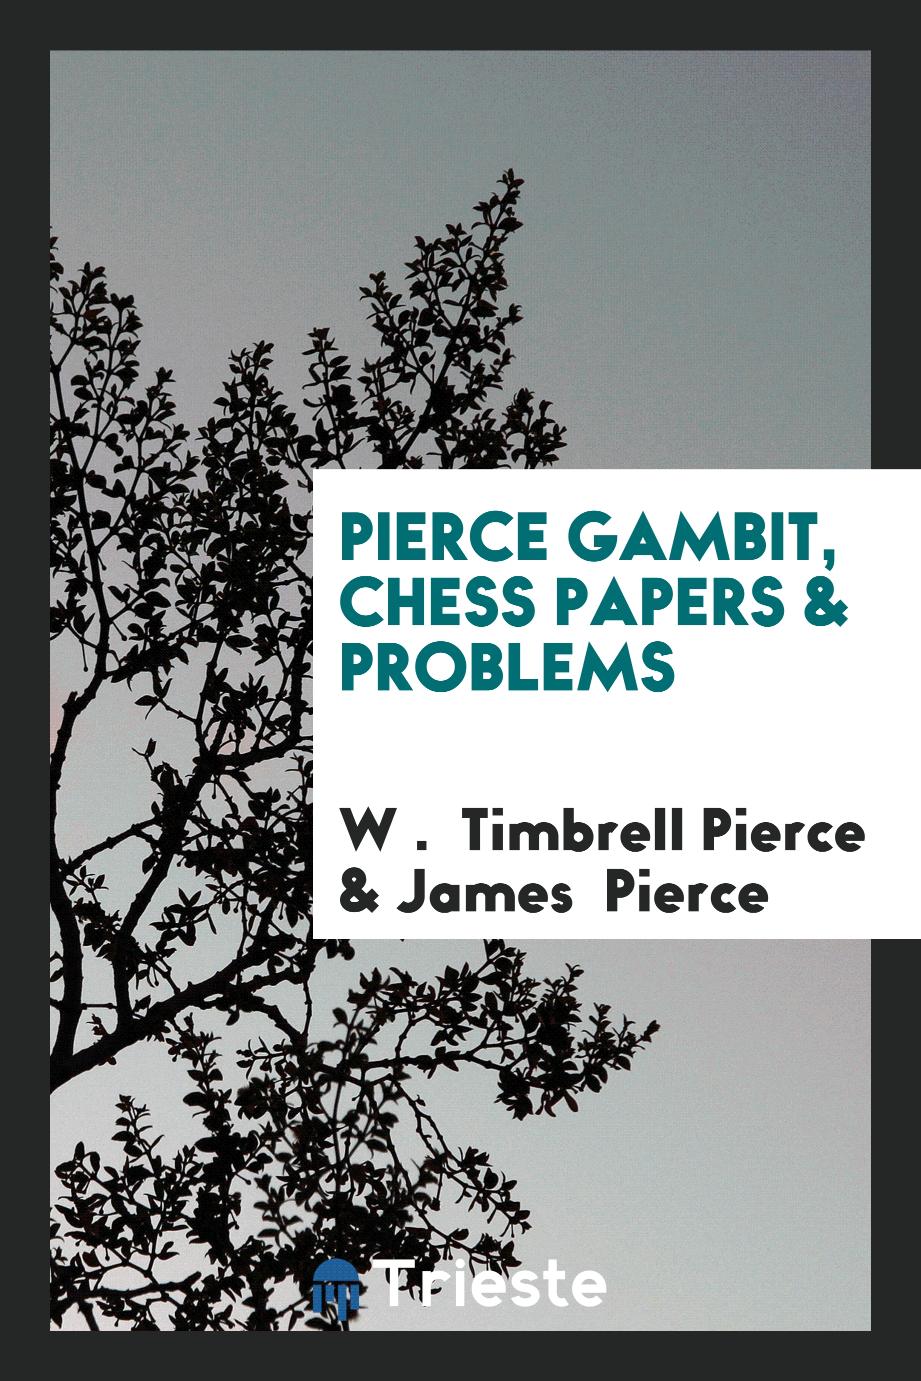 Pierce Gambit, Chess Papers & Problems